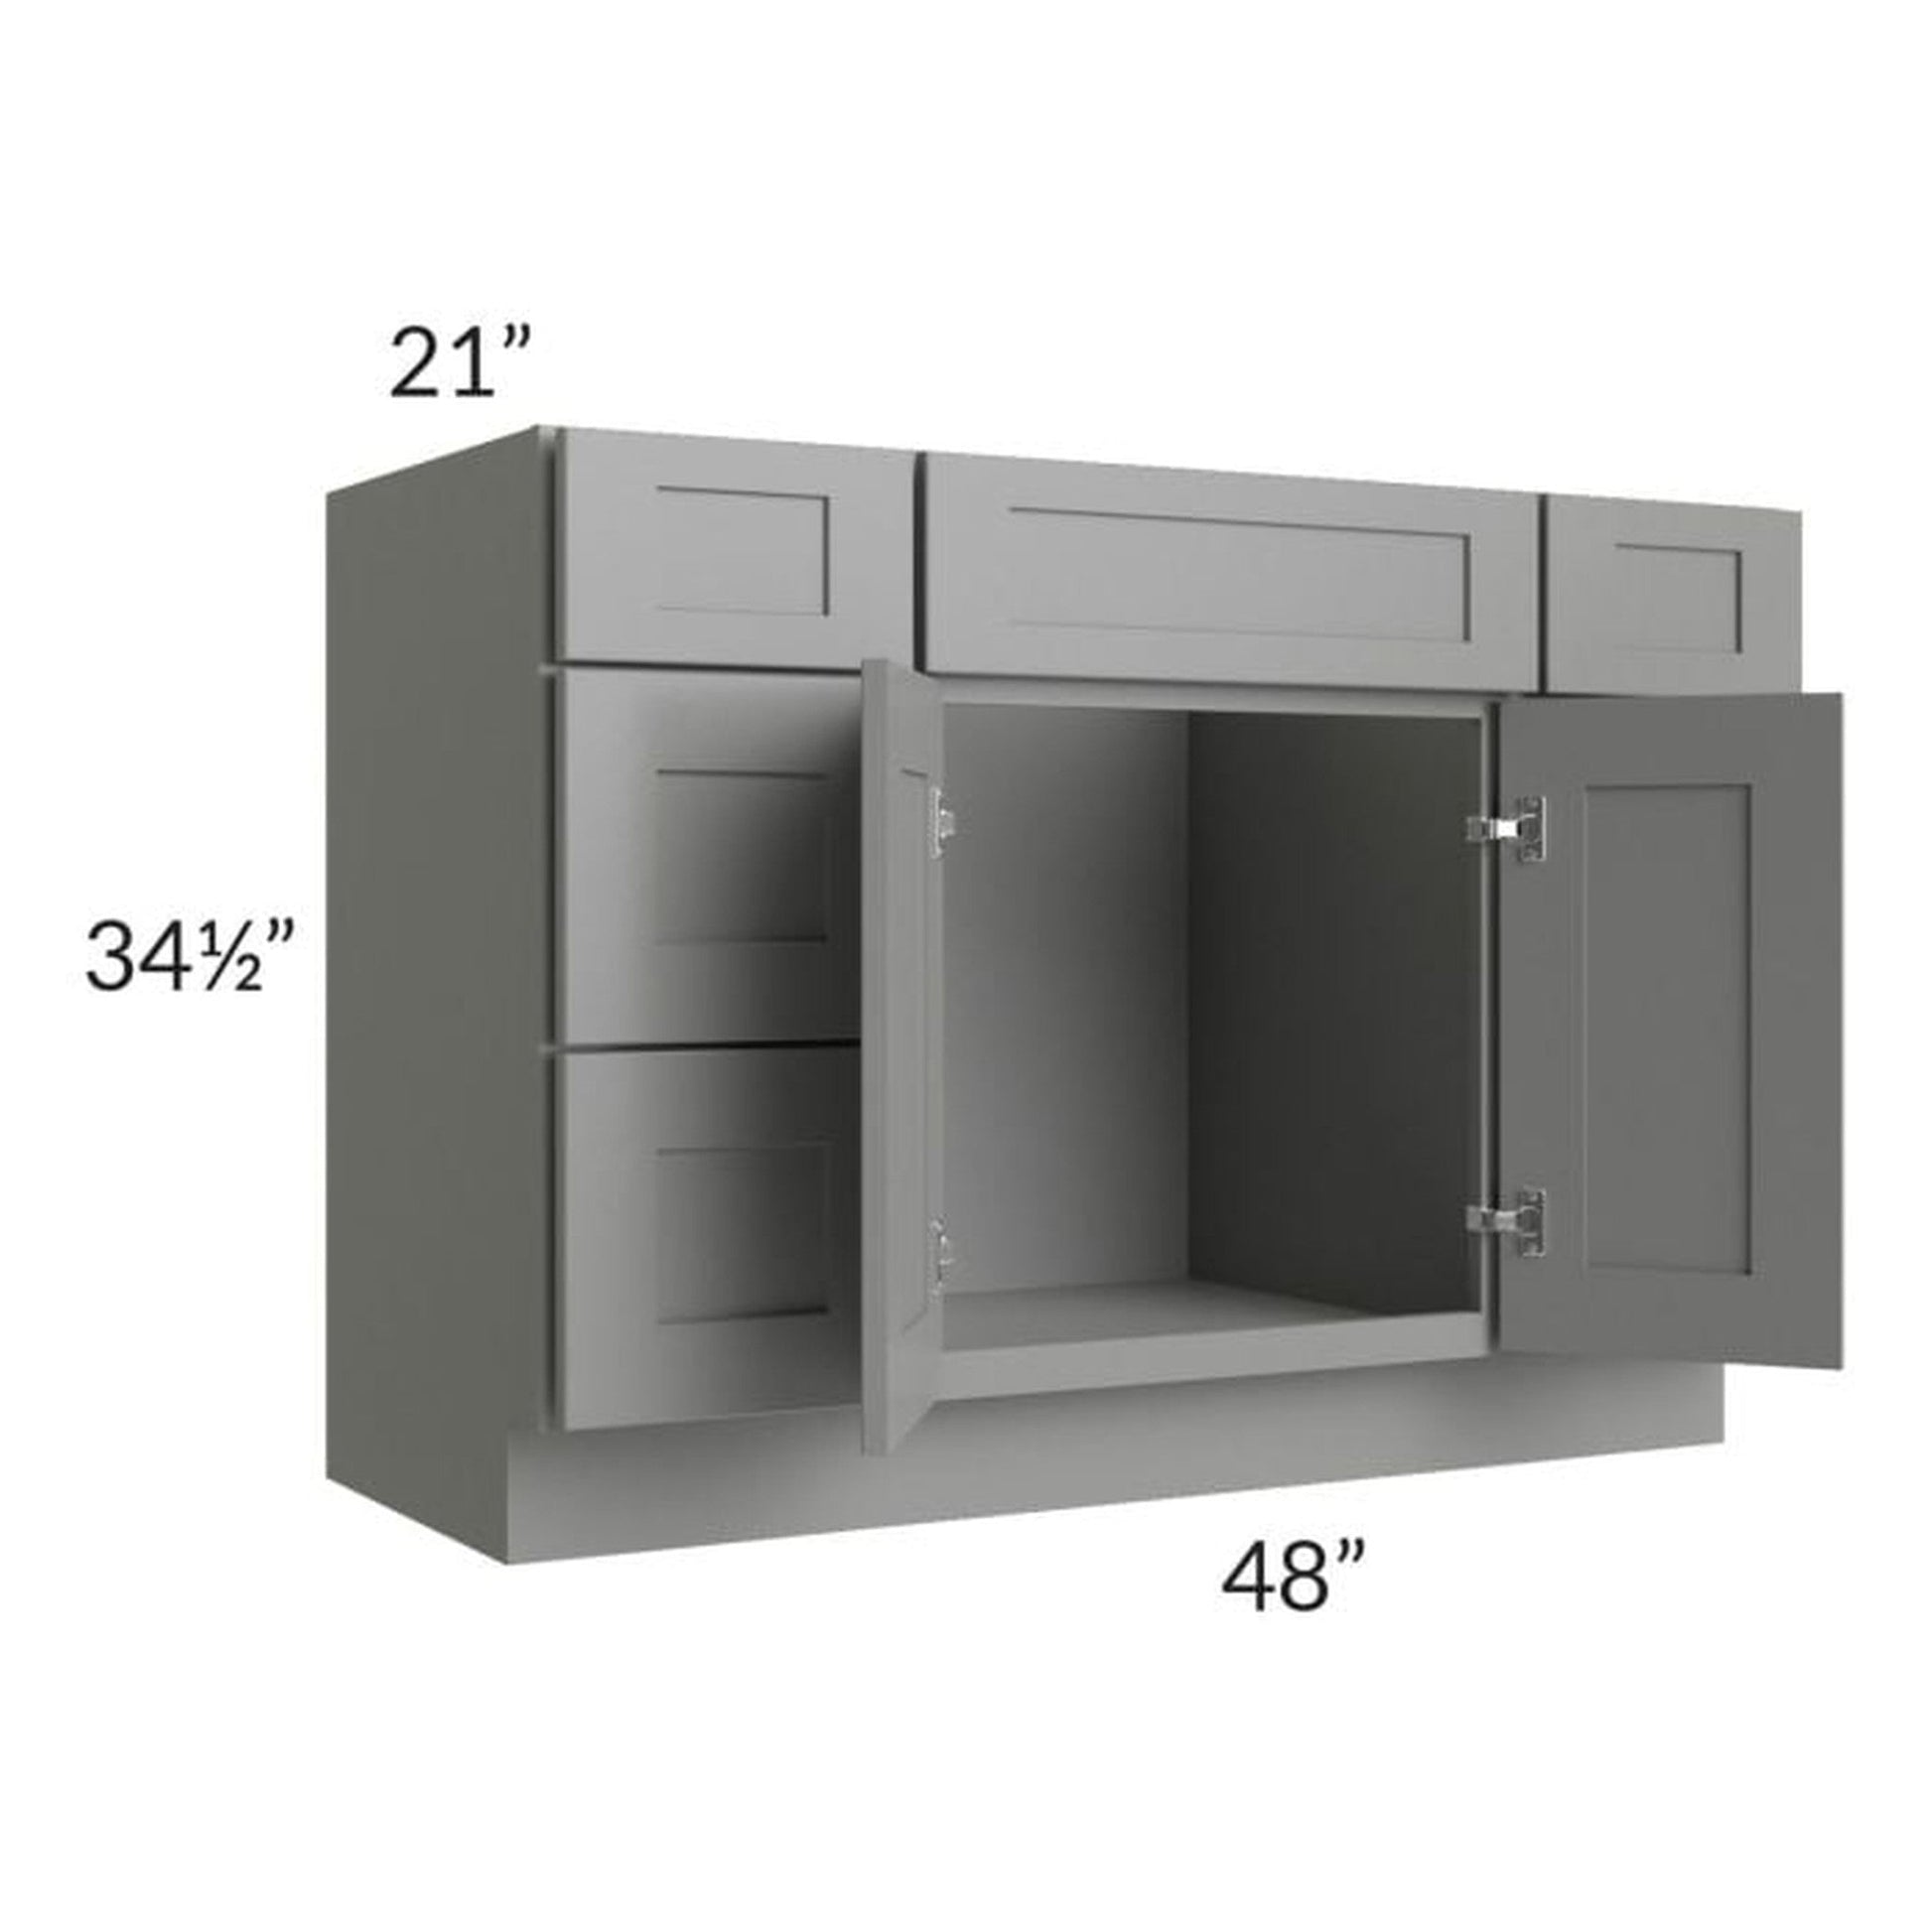 RTA Shale Grey Shaker 48" Vanity Sink Base Cabinet with Drawers with 2 Decorative End Panels